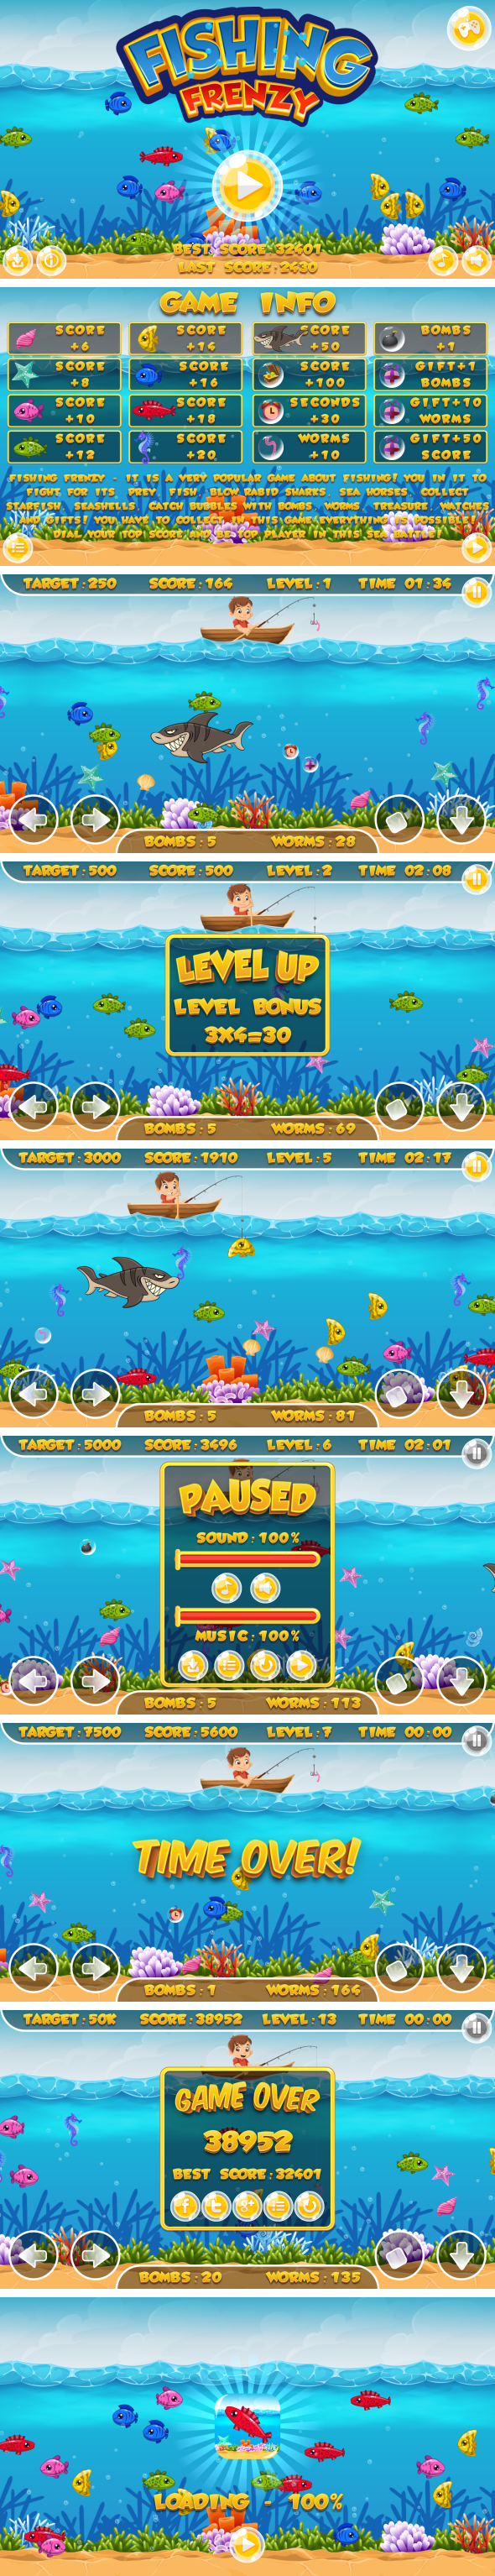 Fishing Frenzy - HTML5 Game, Mobile Version+AdMob!!! (Construct 3 | Construct 2 | Capx) - 1